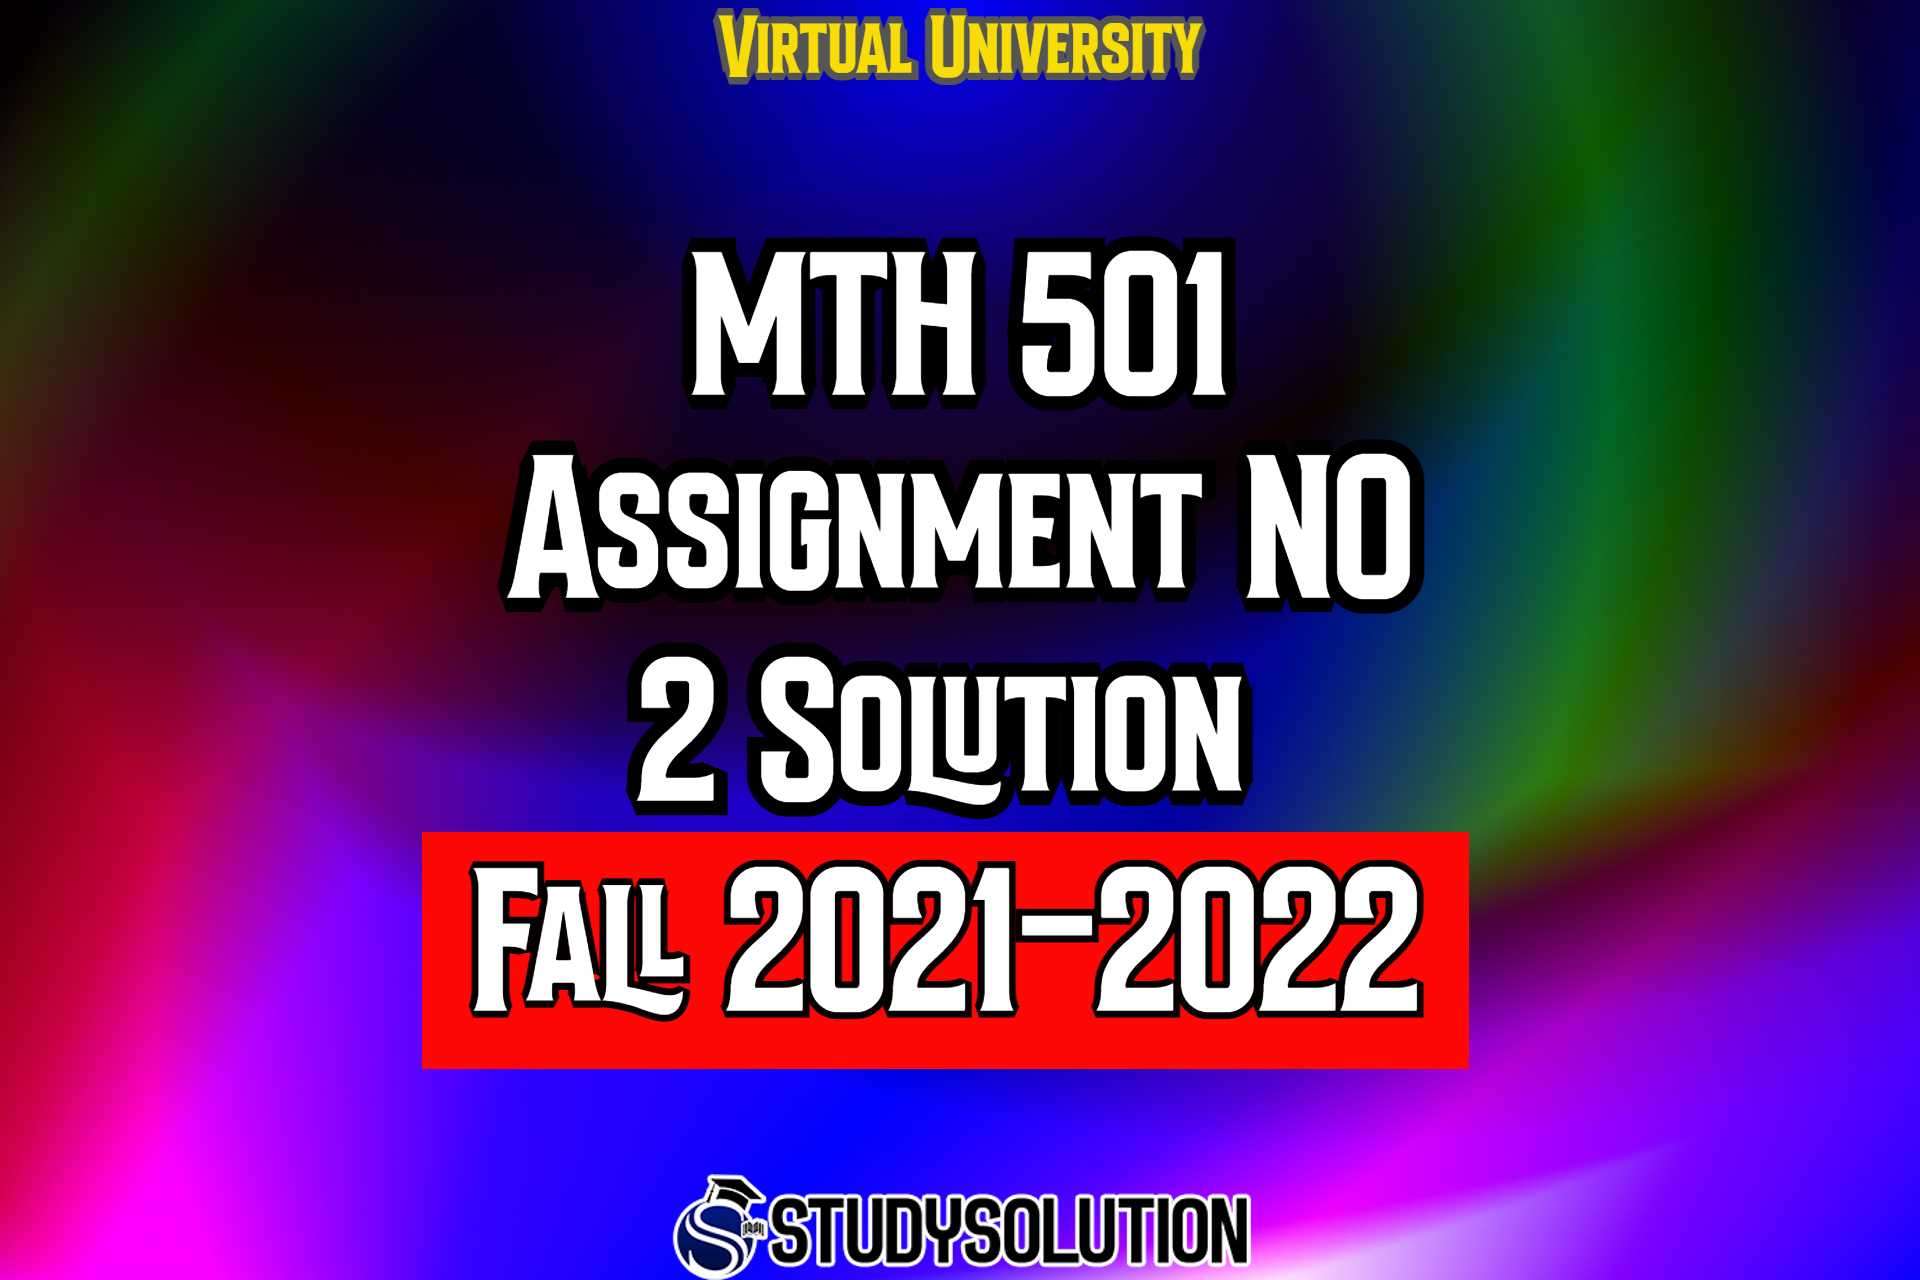 MTH501 Assignment No 2 Solution Fall 2022